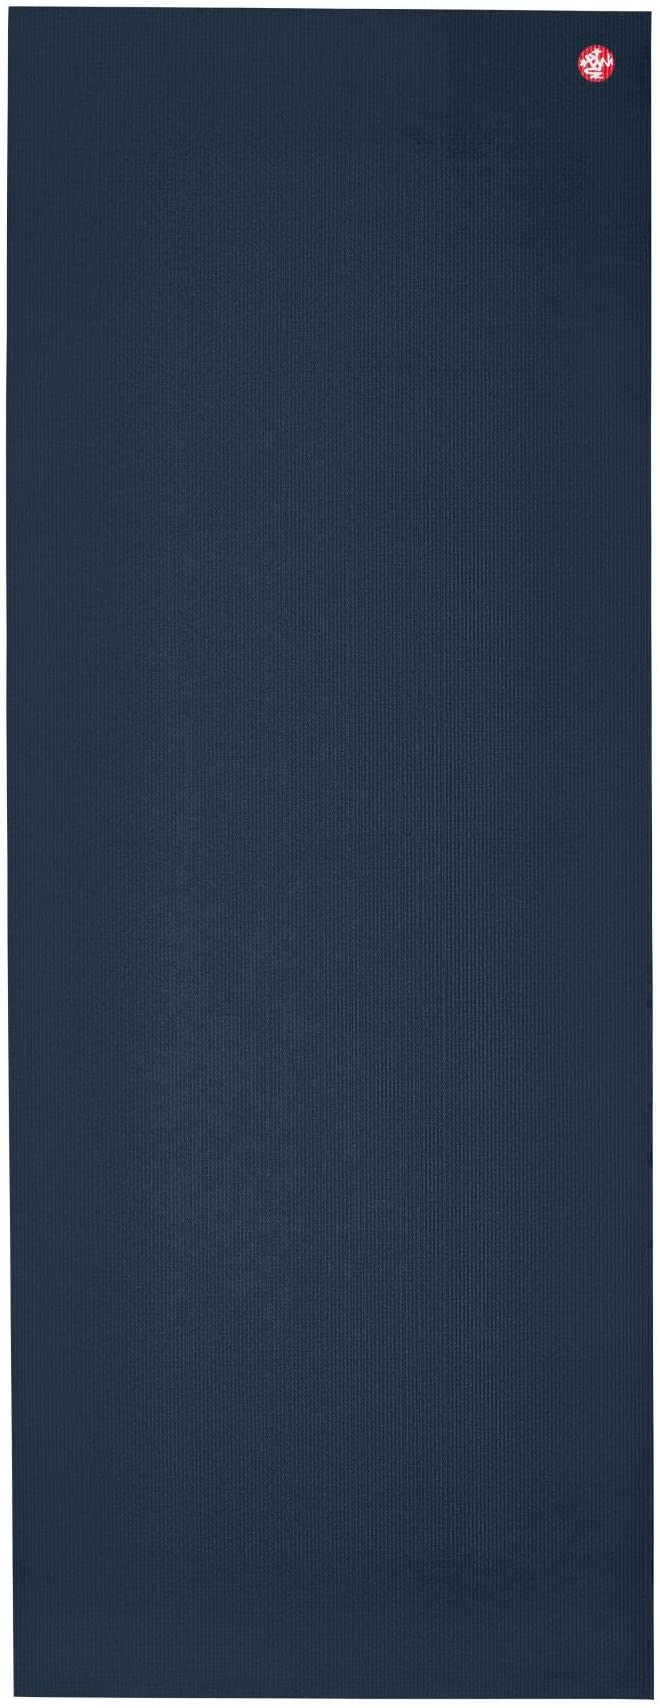 Manduka PRO Yoga Mat – Premium 6mm Thick Mat, Eco Friendly, Oeko-Tex Certified, Chemical Free, High Performance Grip, Ultra Dense Cushioning for Support and Stability in Yoga, Pilates, Gym and Fitness